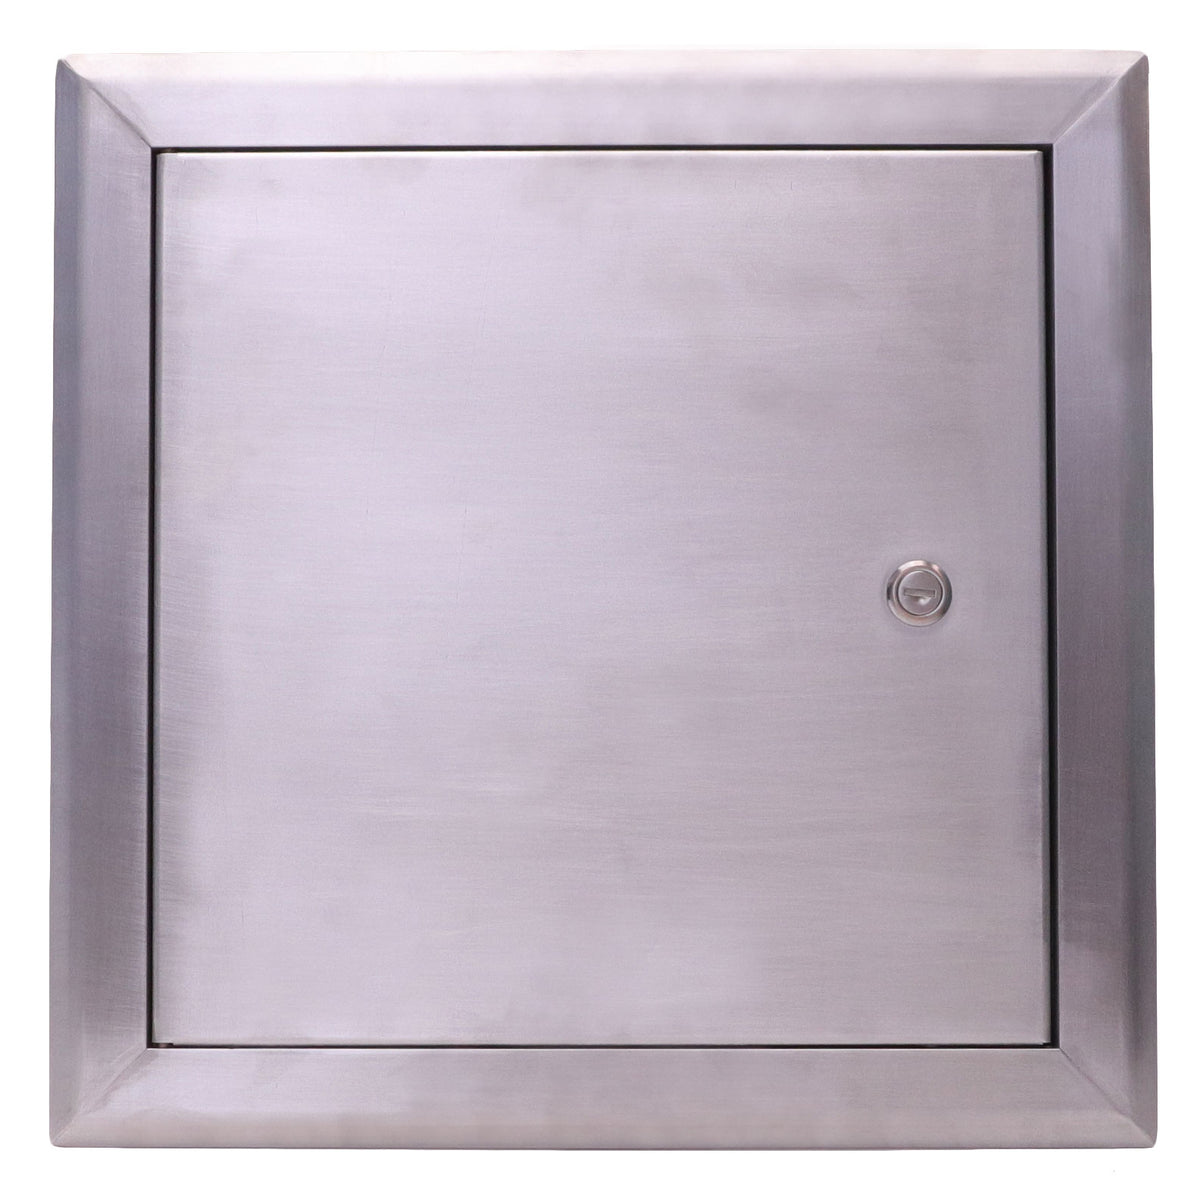 24&quot; X 24&quot; Aluminum Color Insulated Fire Rated Access Panel Door For Wall / Ceiling Application (Lock and Key) With Frame - [Outer Dimensions: 25&quot; Width X 25&quot; Height]